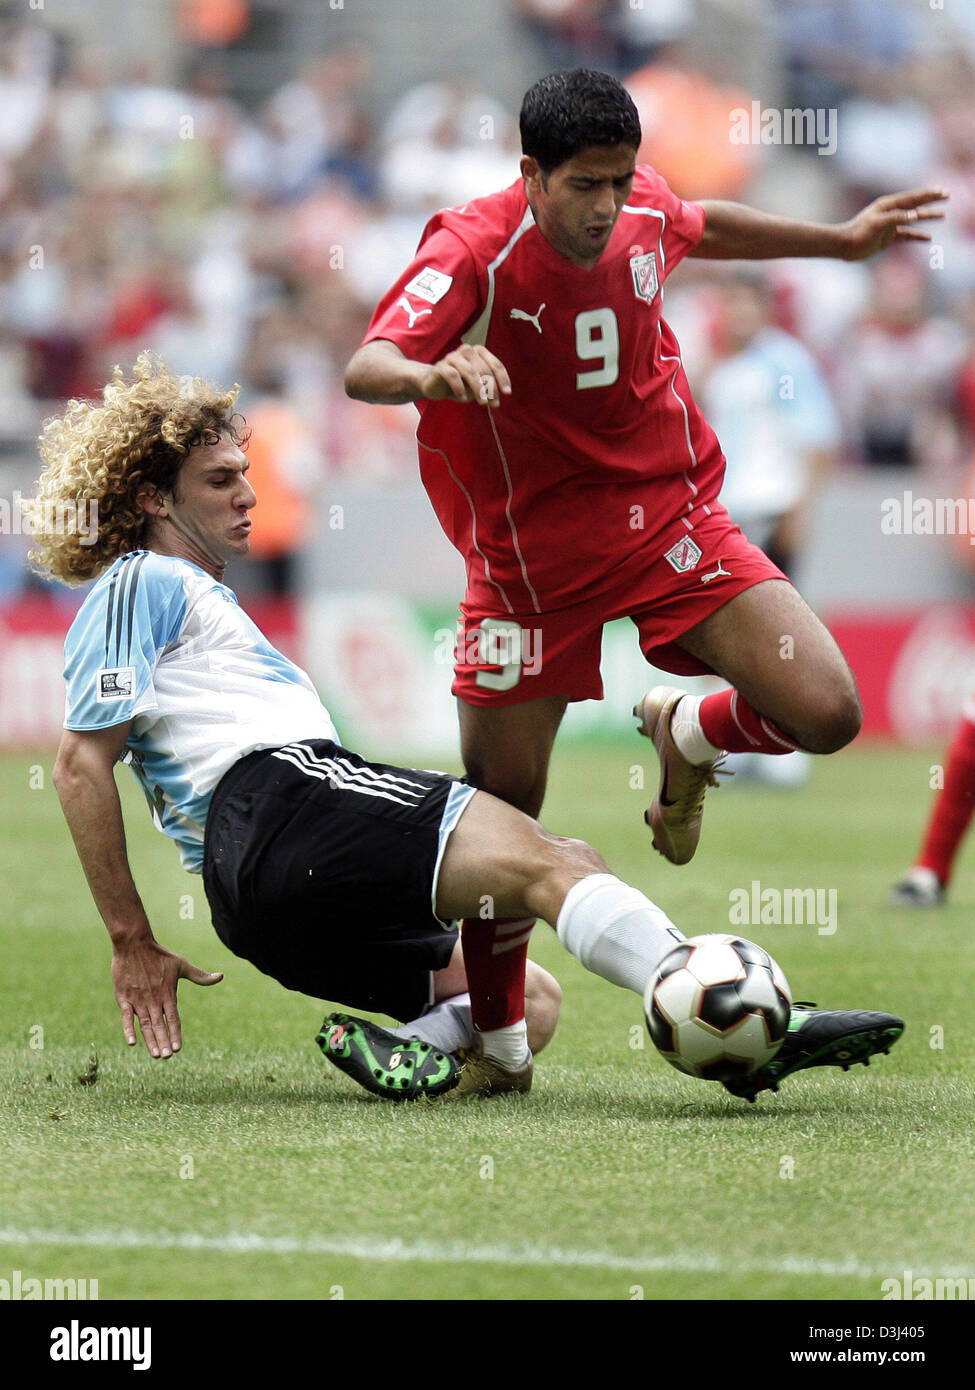 (dpa) - Argentinian soccer player Fabricio Coloccini (L) fights for the ball with Tunesian Haykel Guemamdia during the opening match of the FIFA Confederations Cup Argentina vs Tunesia in Cologne, Germany, 15 June 2005. Stock Photo